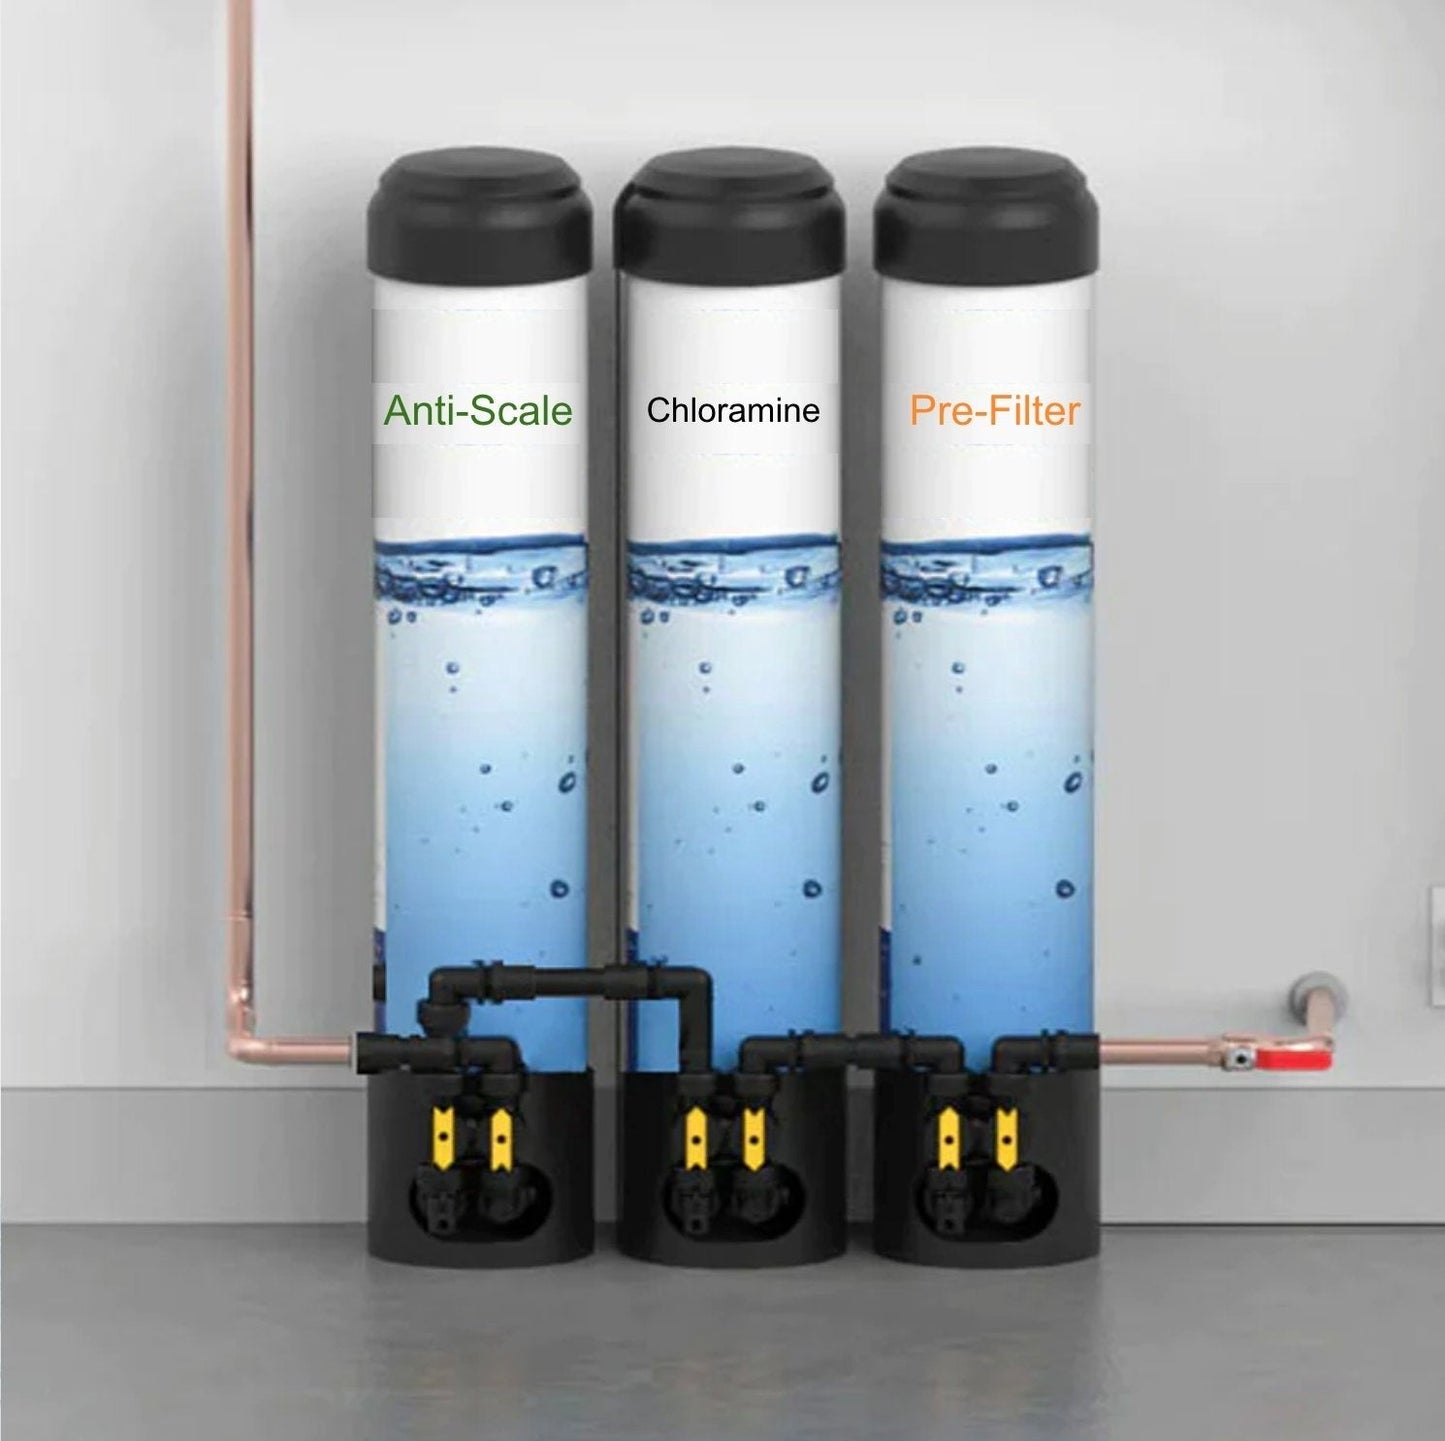 TOXIN SAFE - Tradewinds Water Filtration